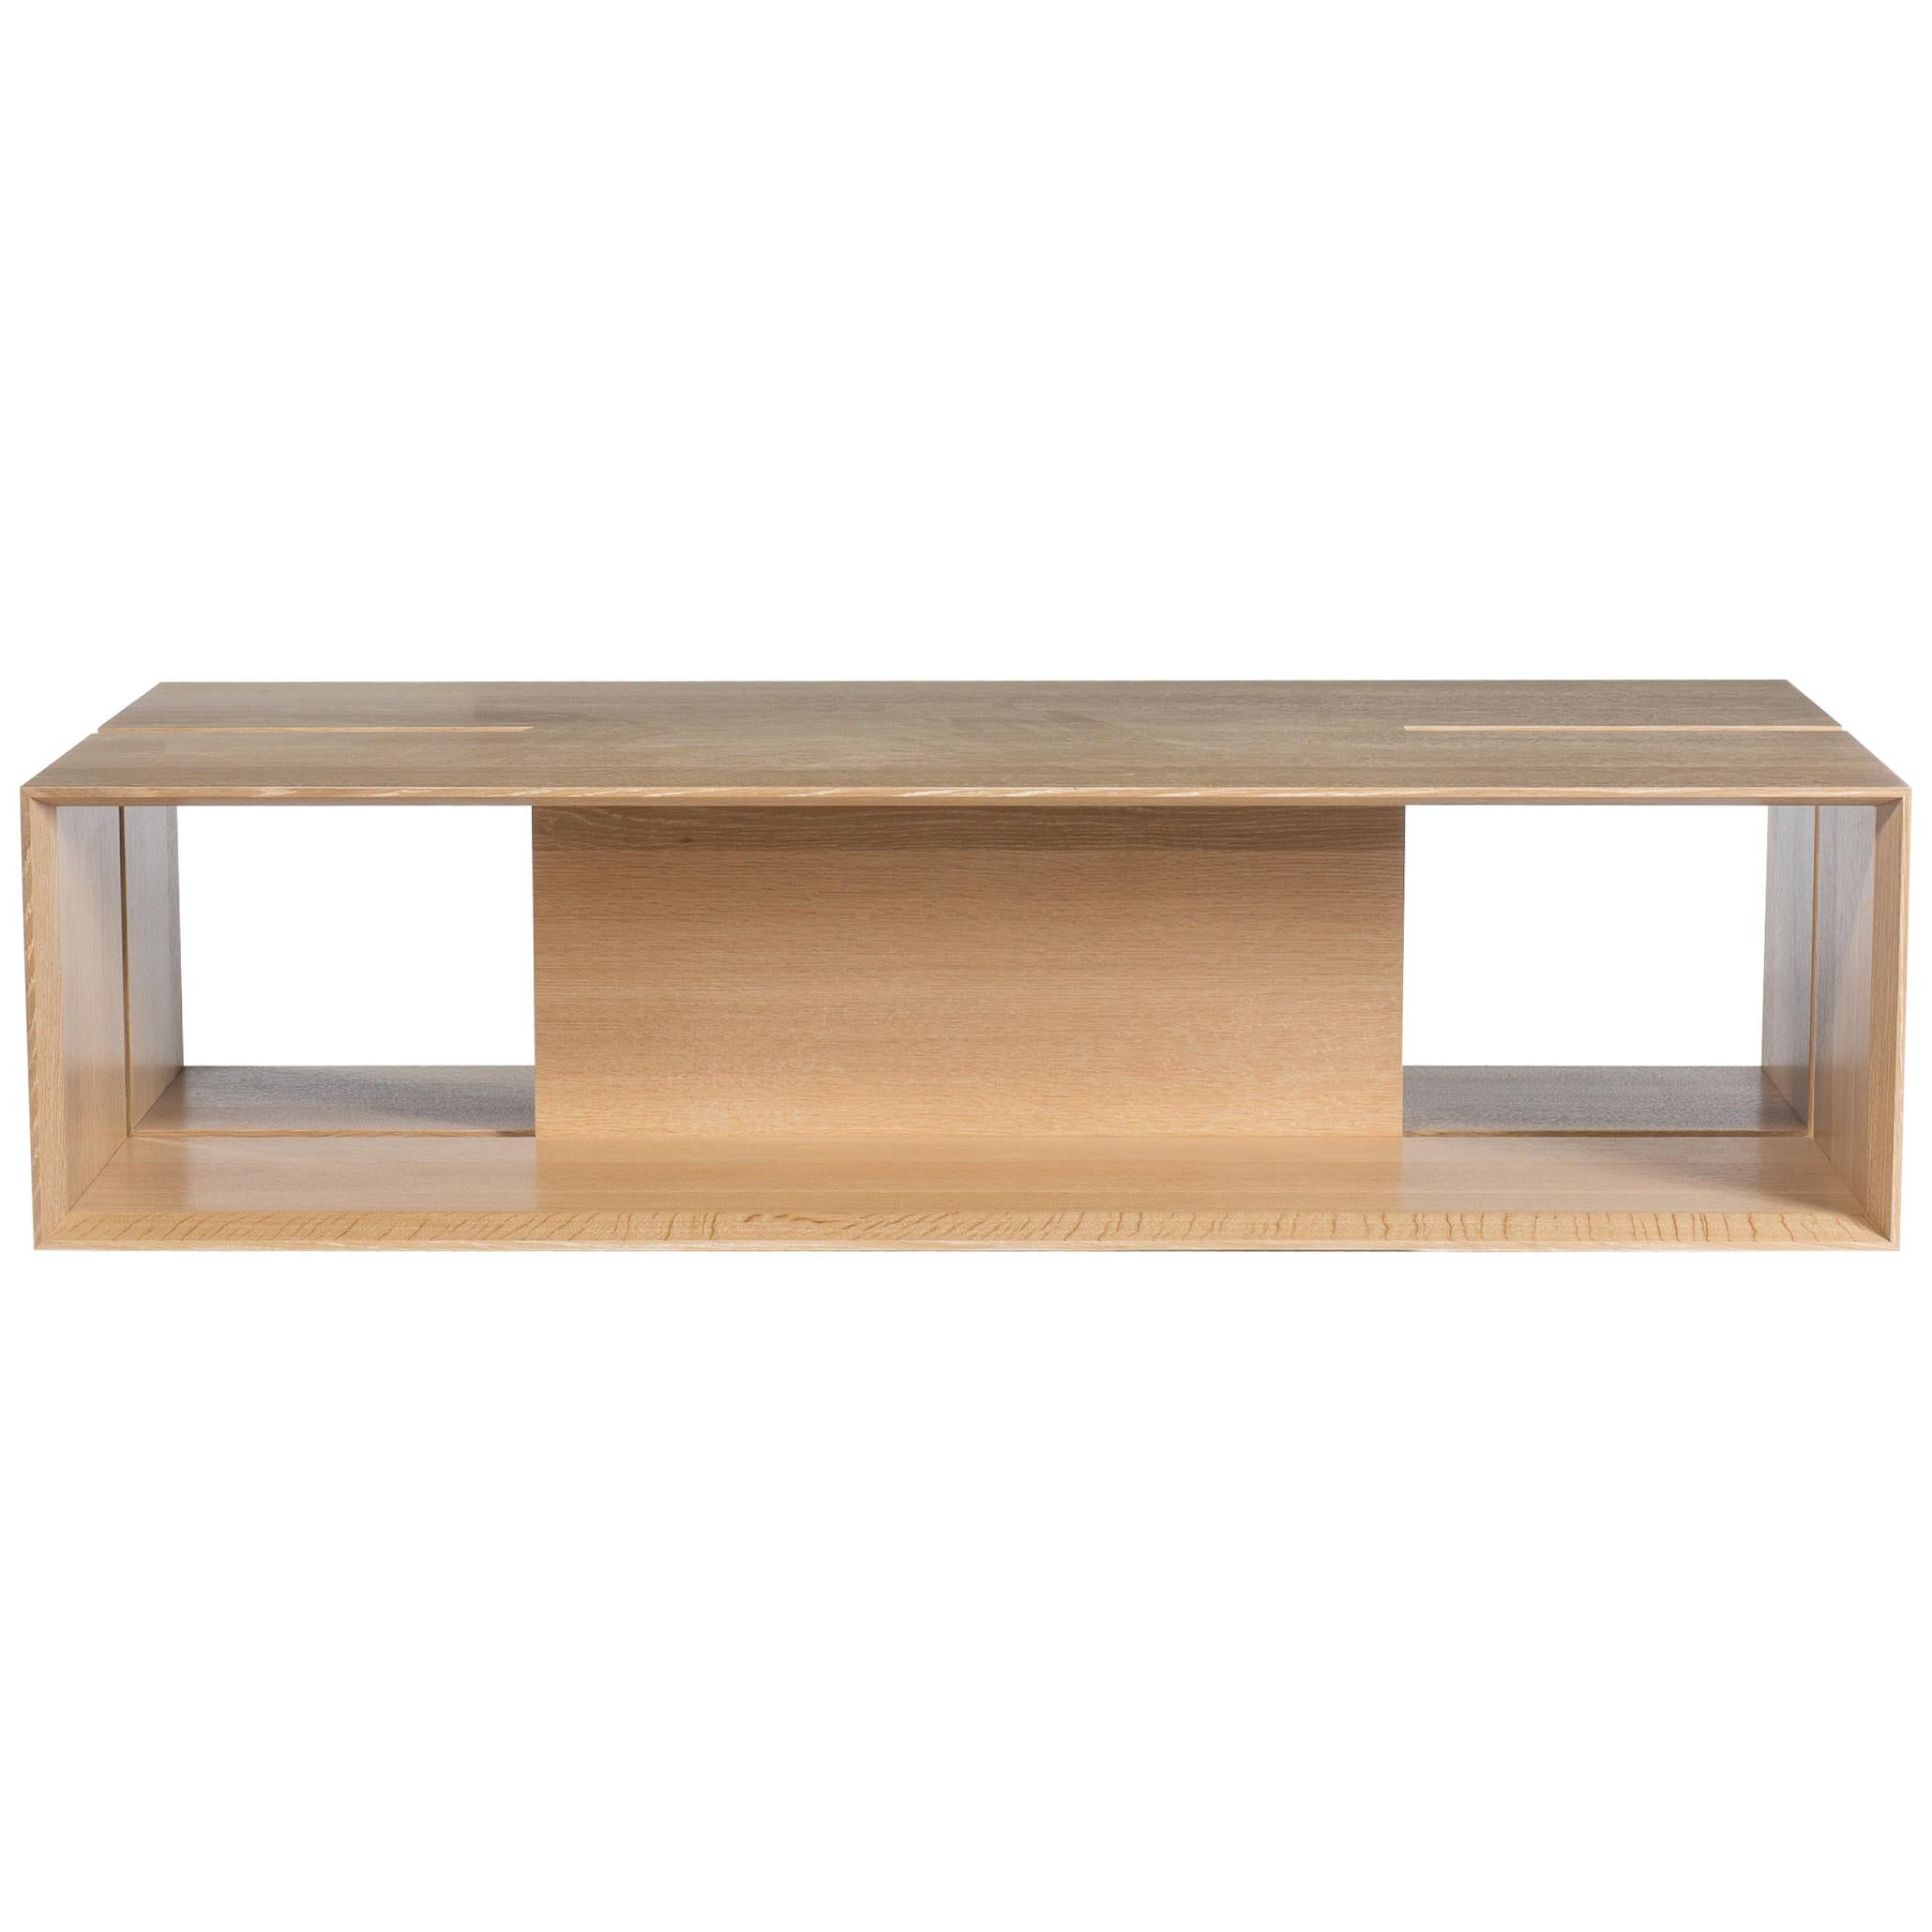 Modern Wood Coffee Table in Solid White Oak, by Studio DiPaolo